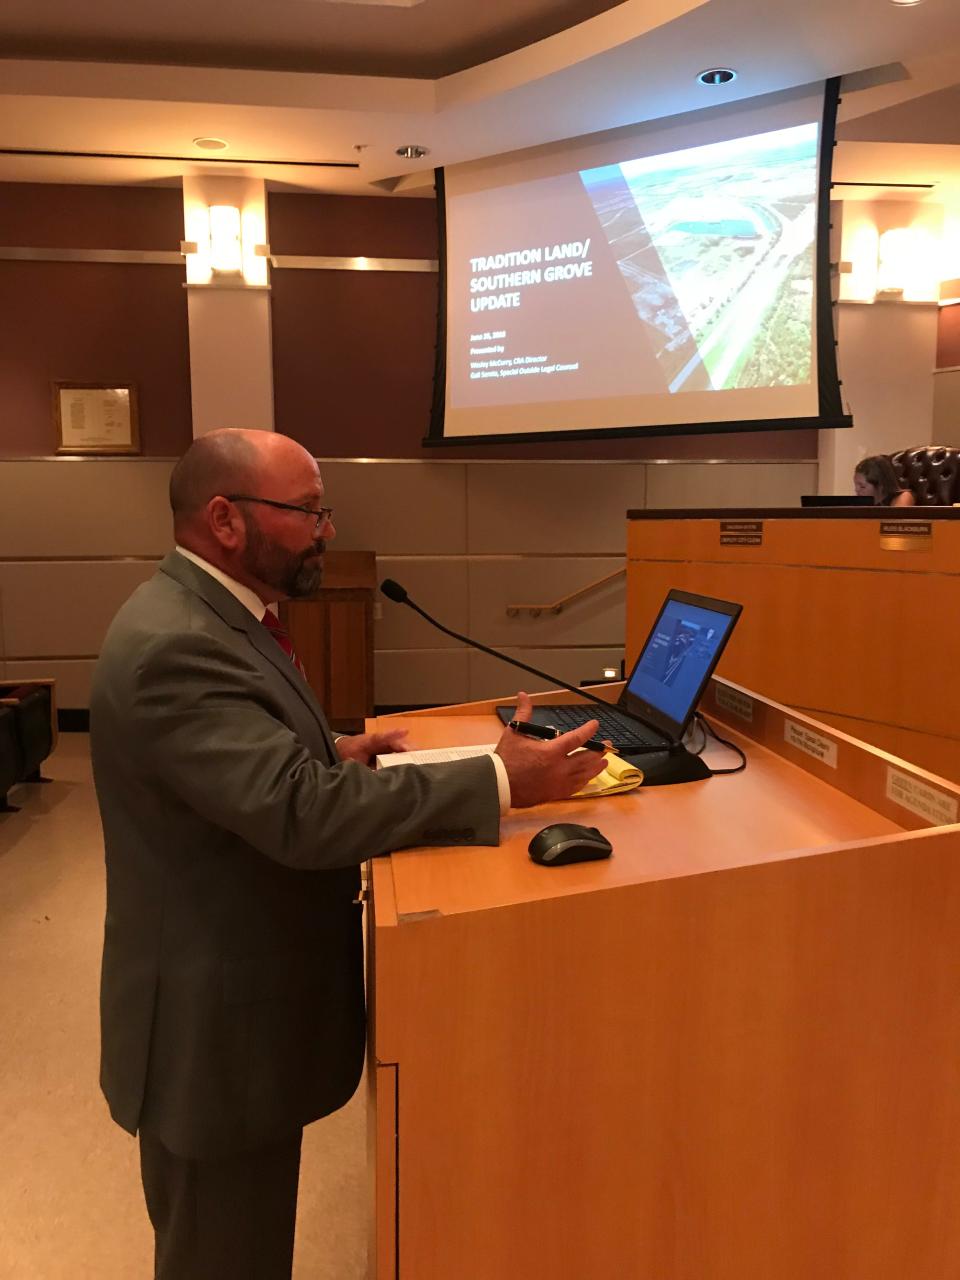 Economic Development Council Senior Vice President Wes McCurry, then the director of the Port St. Lucie Community Redevelopment Agency, addresses the City Council in this 2018 file photo.